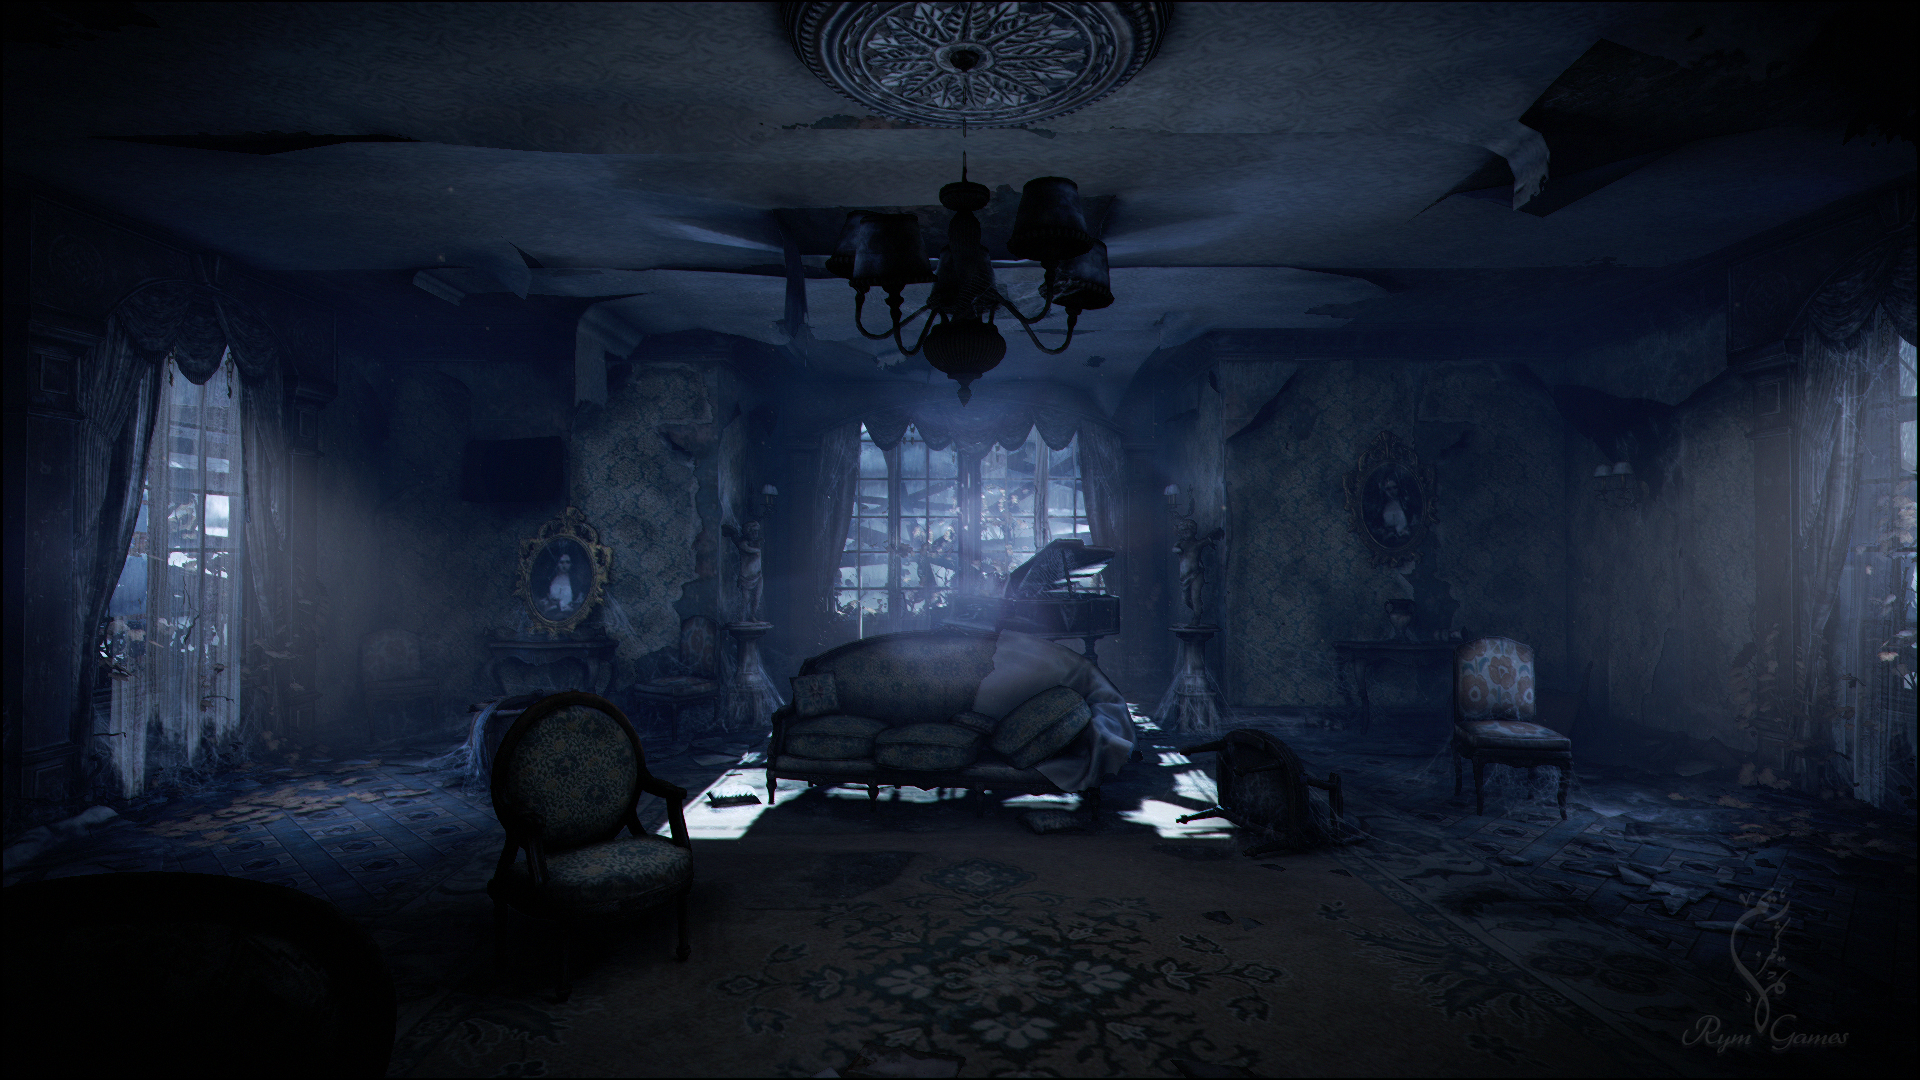 The Conjuring House Screenshots 2 Image Indie Db